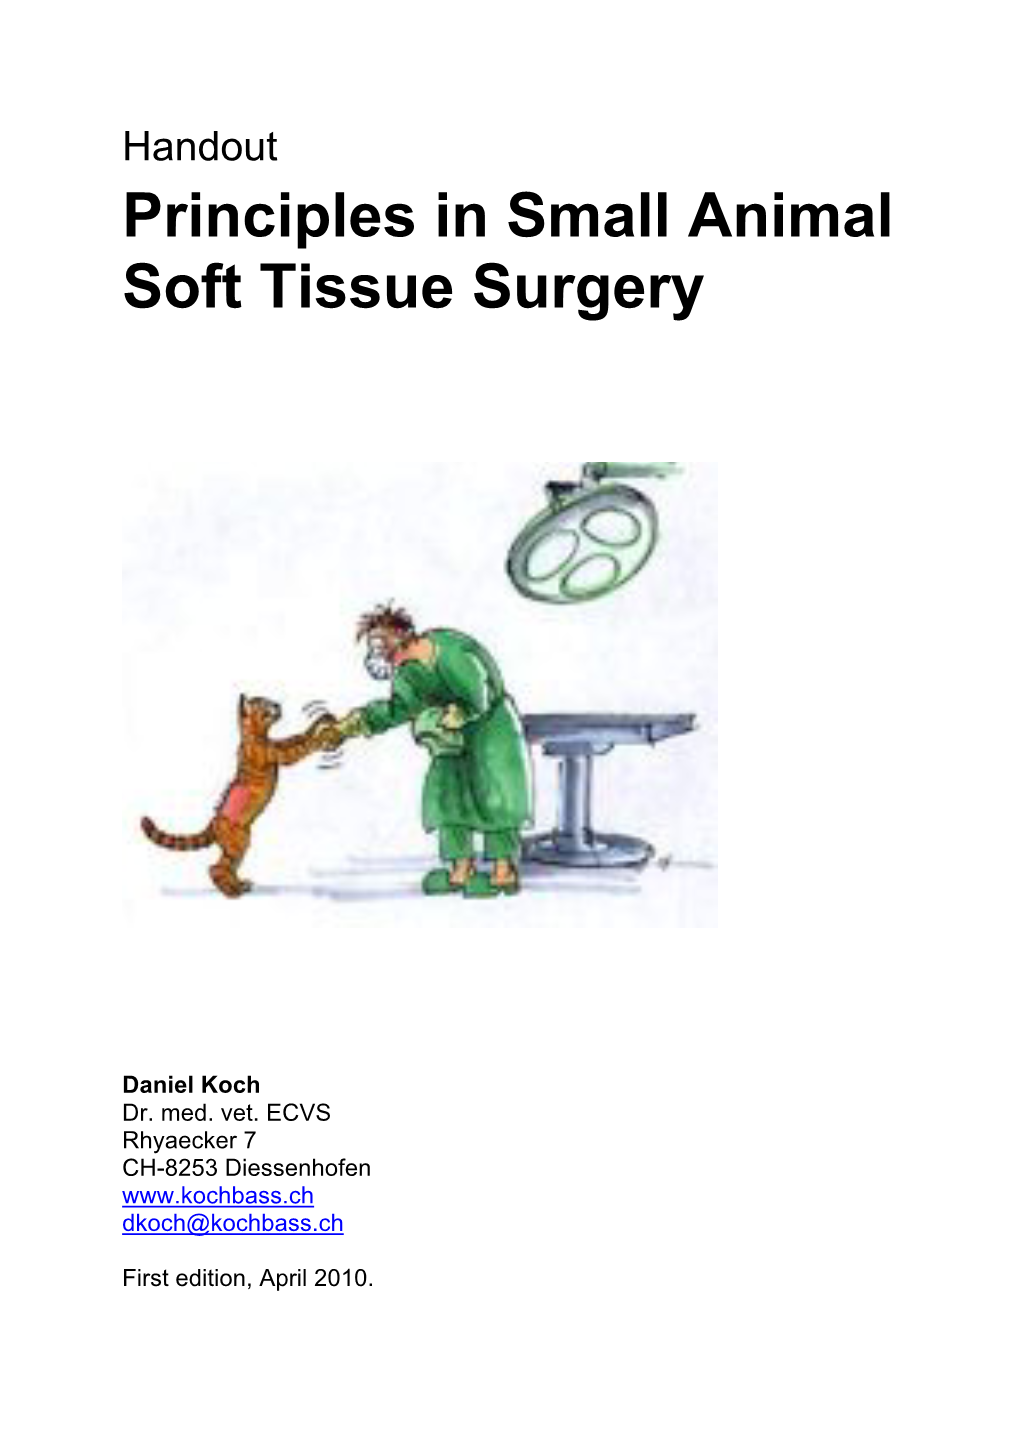 Principles in Small Animal Soft Tissue Surgery